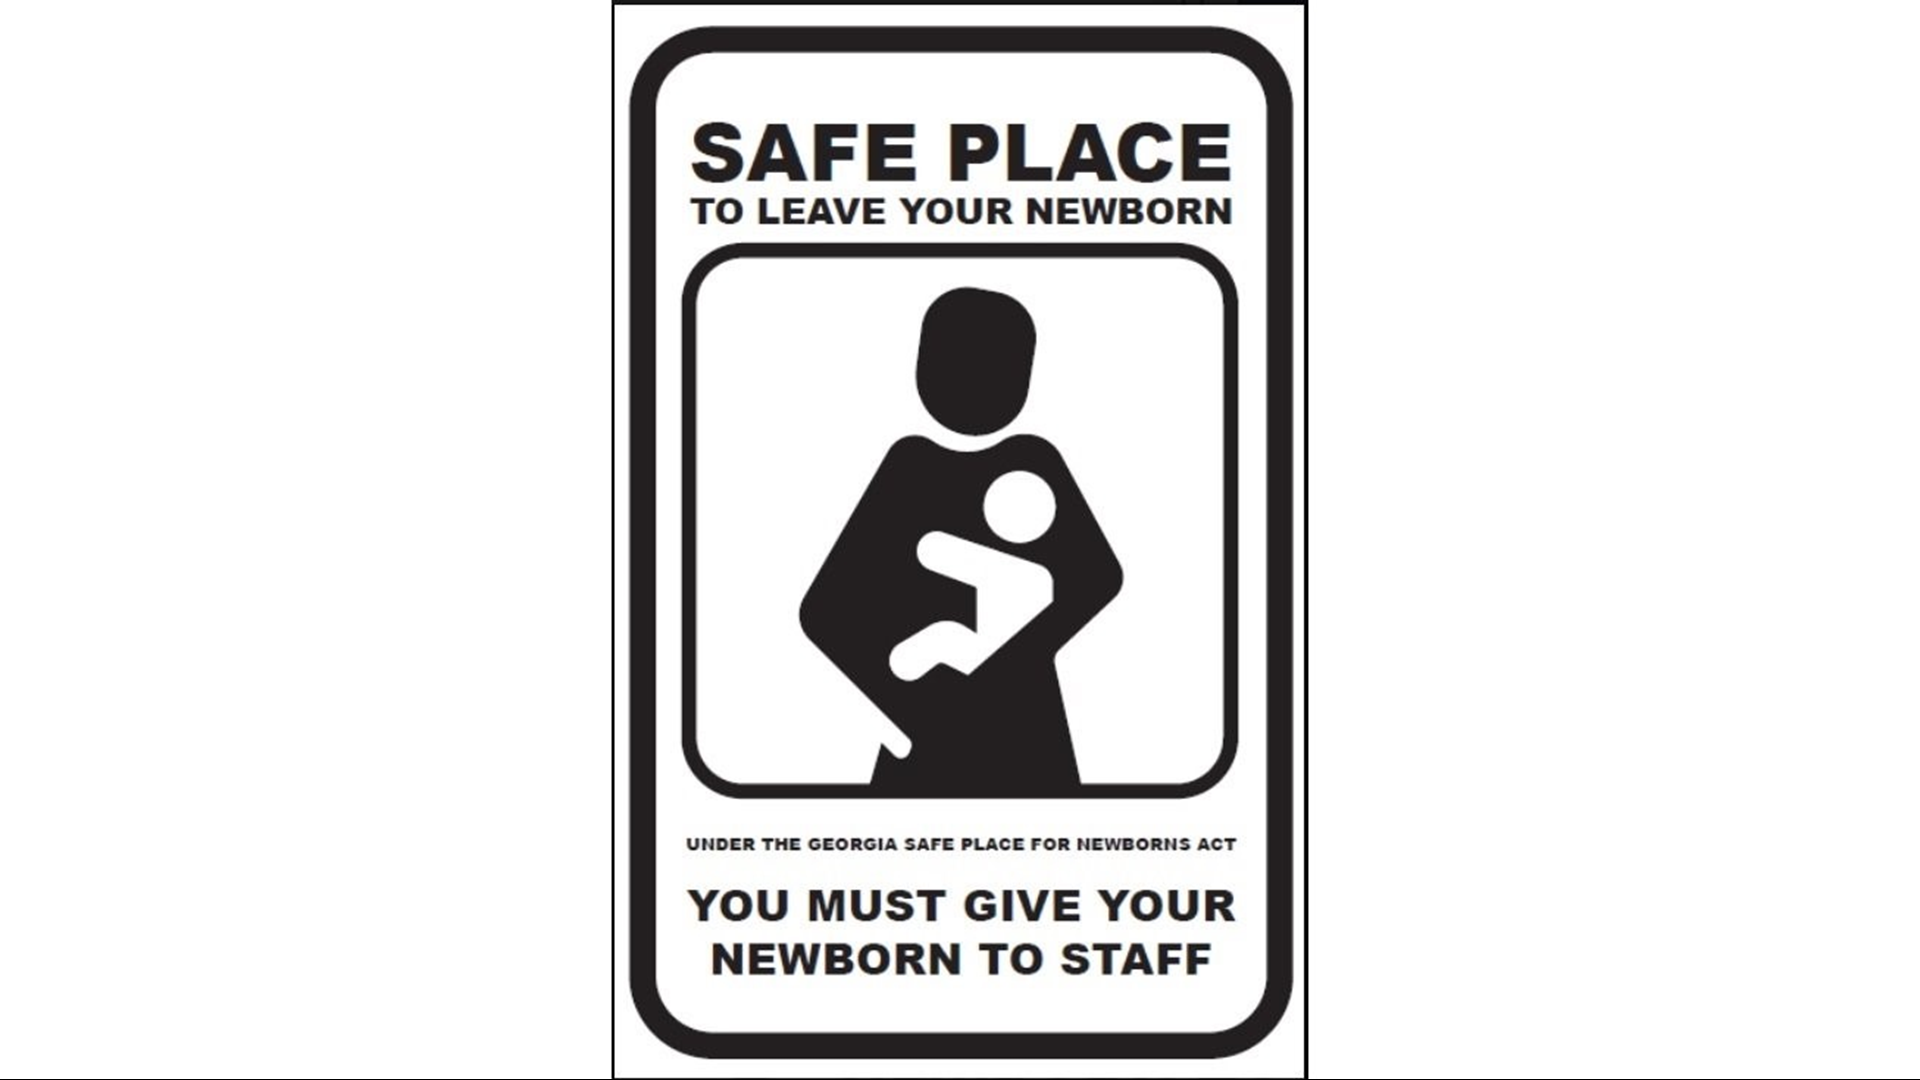 Why do some mothers feel the need to leave their newborn at fire stations, police stations or hospitals?